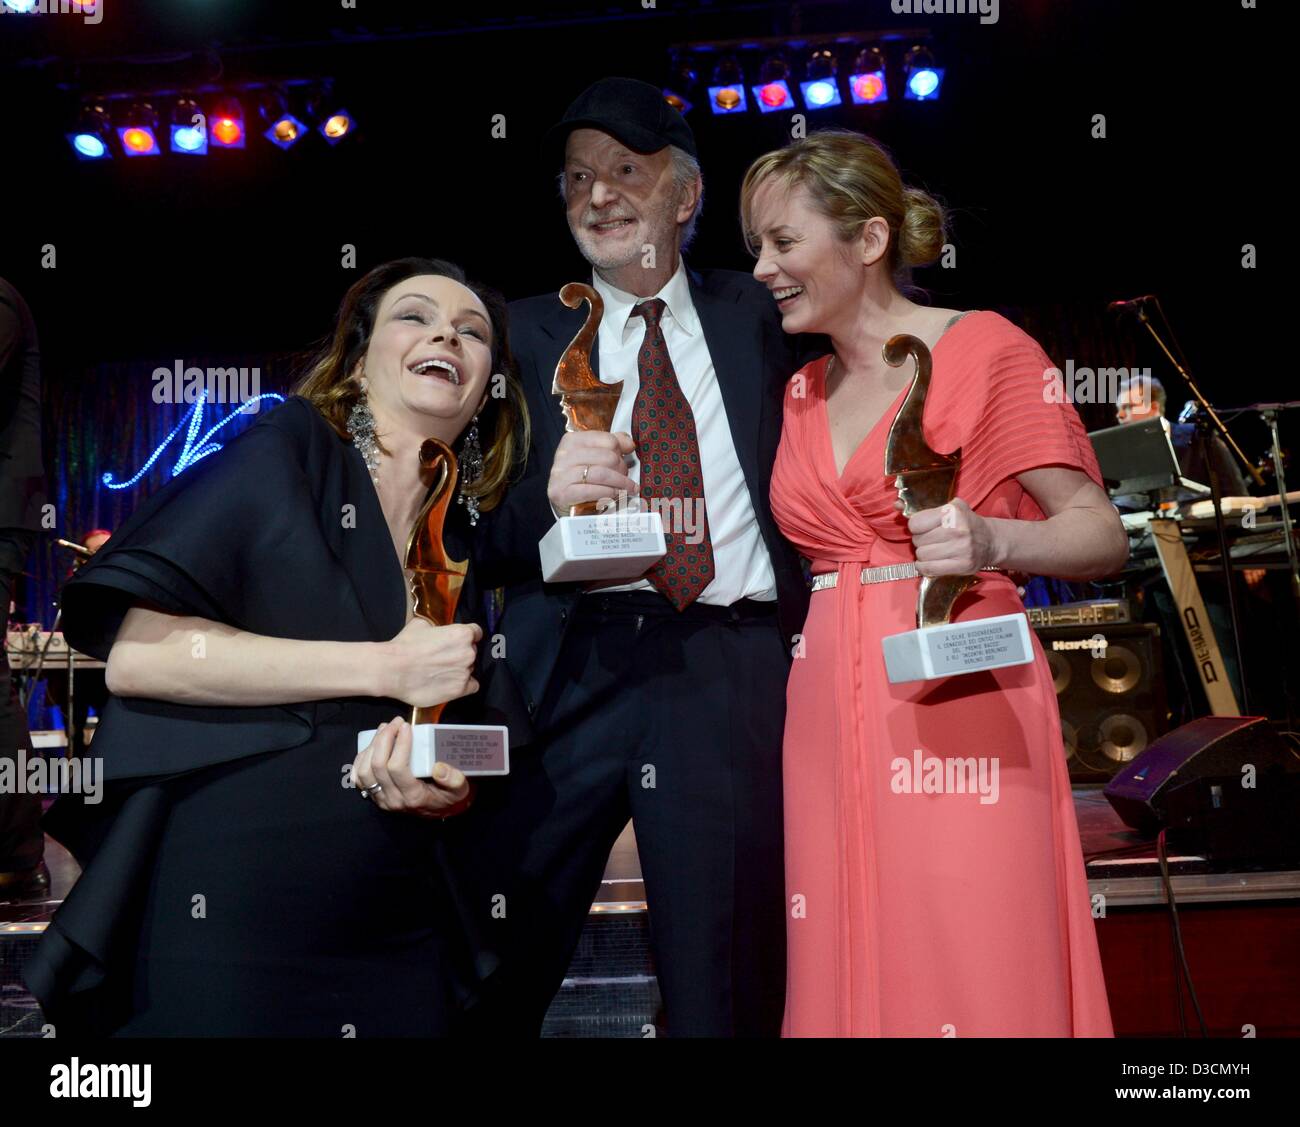 Francesca Neri, Michael Gwisdek and Silke Bodenbender (left ot right) award winners of the Premio Bacco pose with their awards at the Notte delle Stelle, Hotel Maritim during the 63 Berlinale Berlin, 15 February 2013. Stock Photo